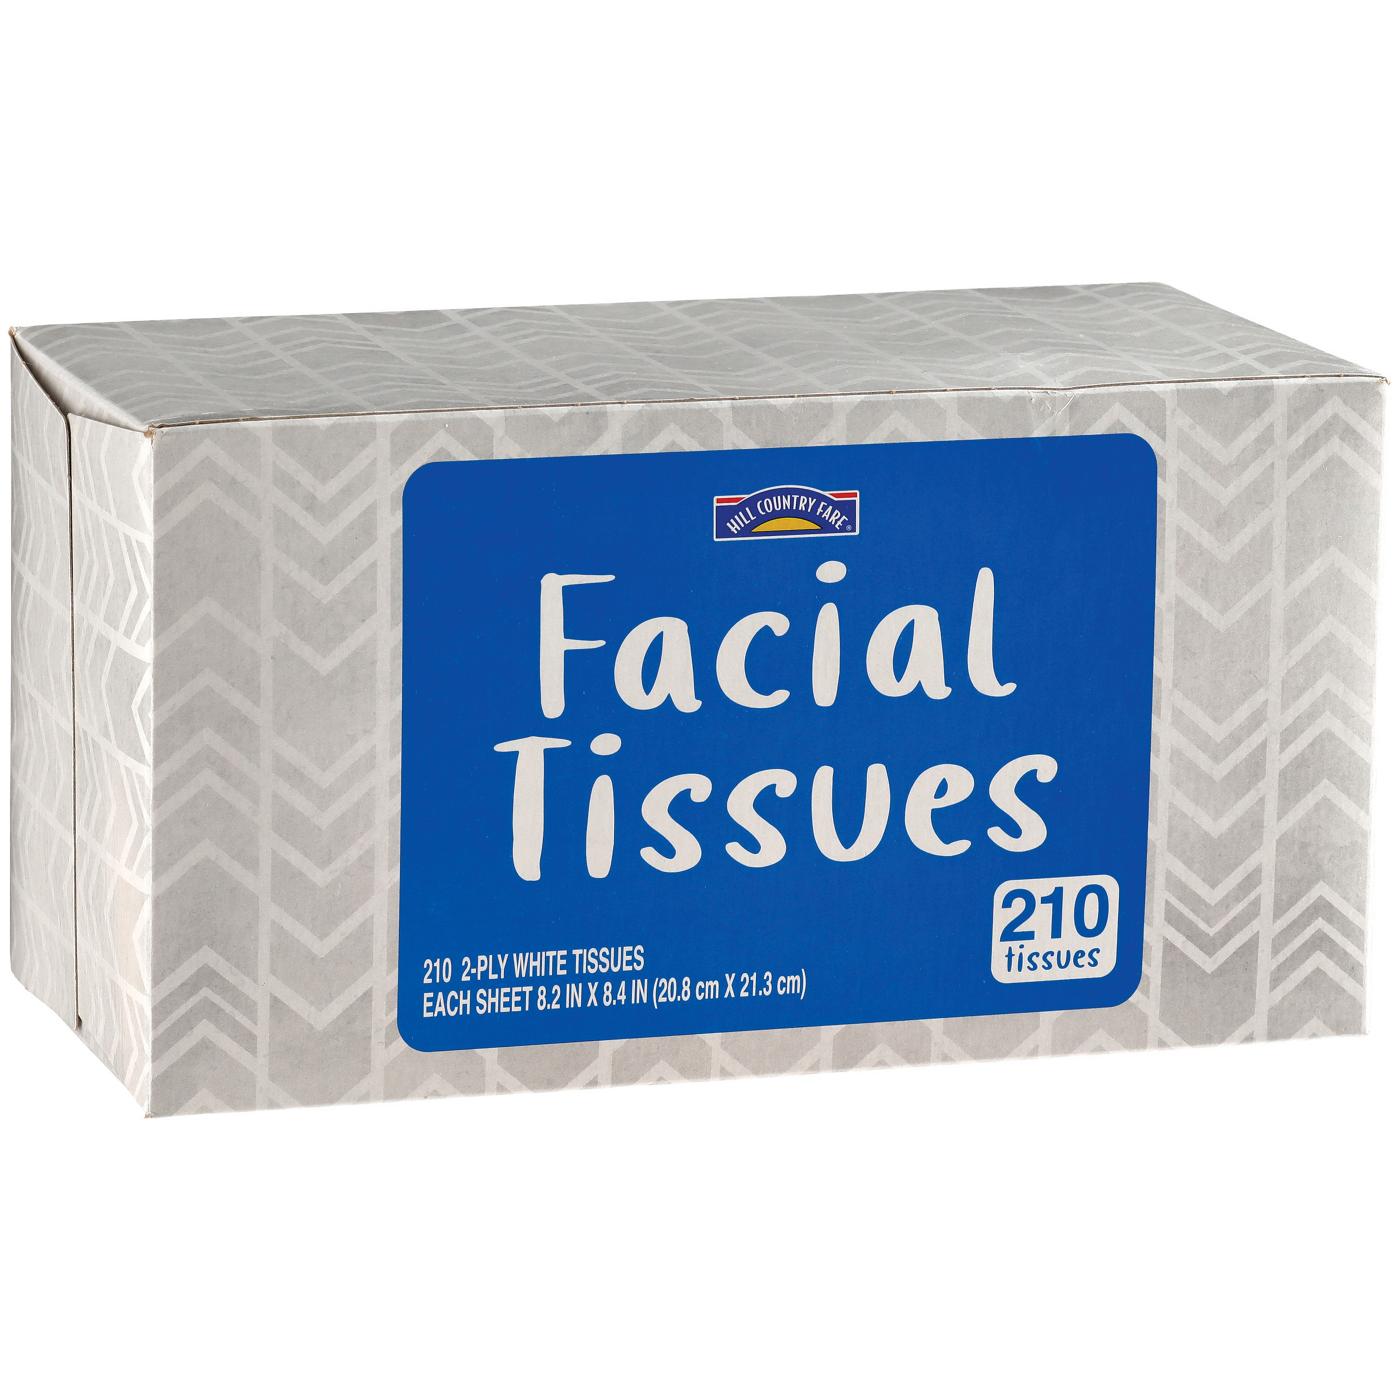 Hill Country Fare Facial Tissues; image 3 of 4